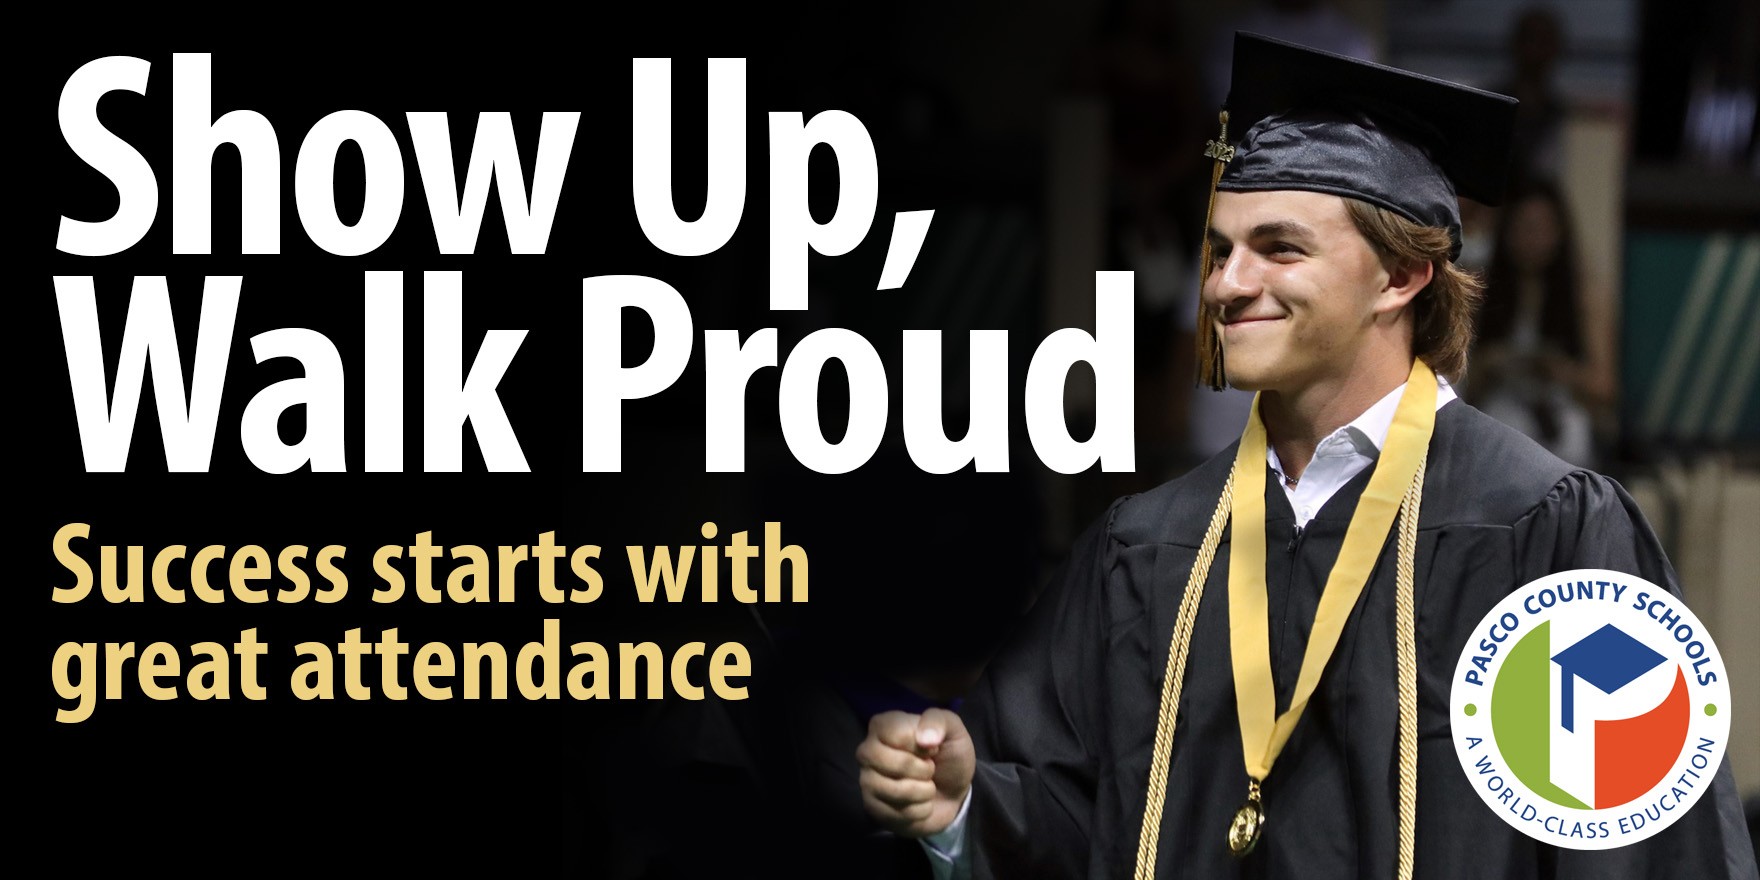 show up, walk proud - success starts with great attendance